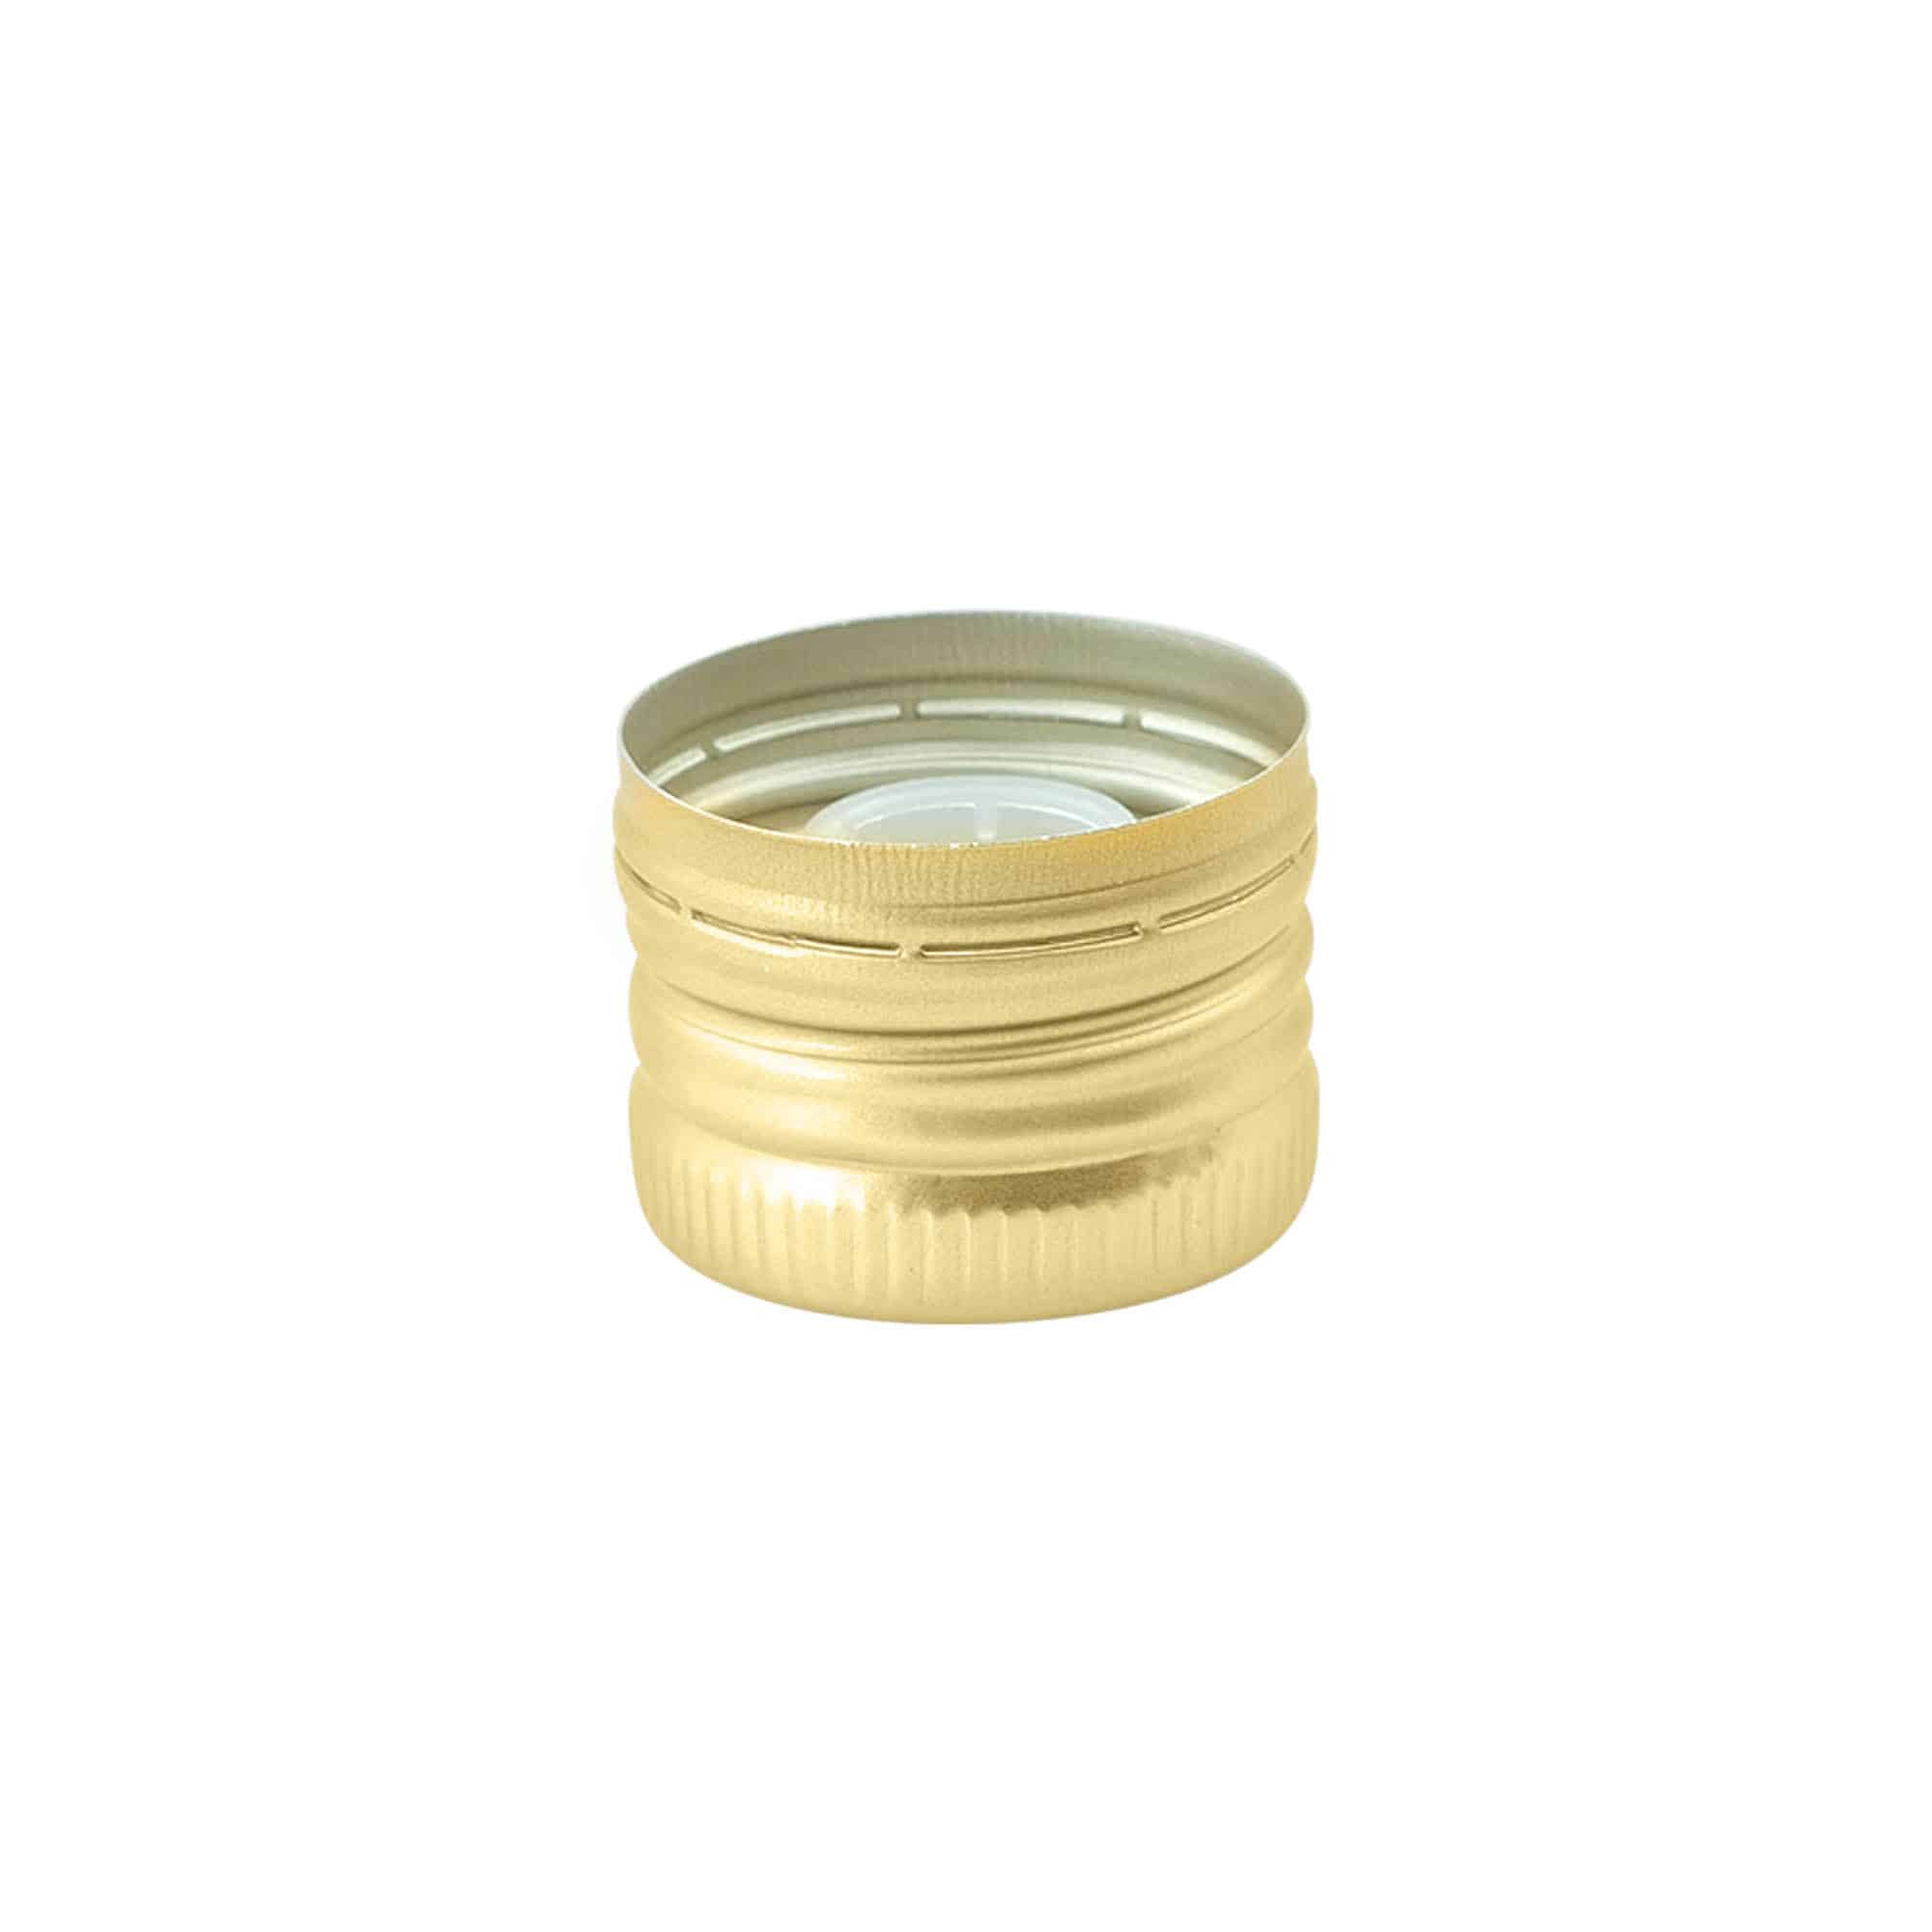 Screw cap with spout insert, metal/plastic, gold, for opening: PP 31.5